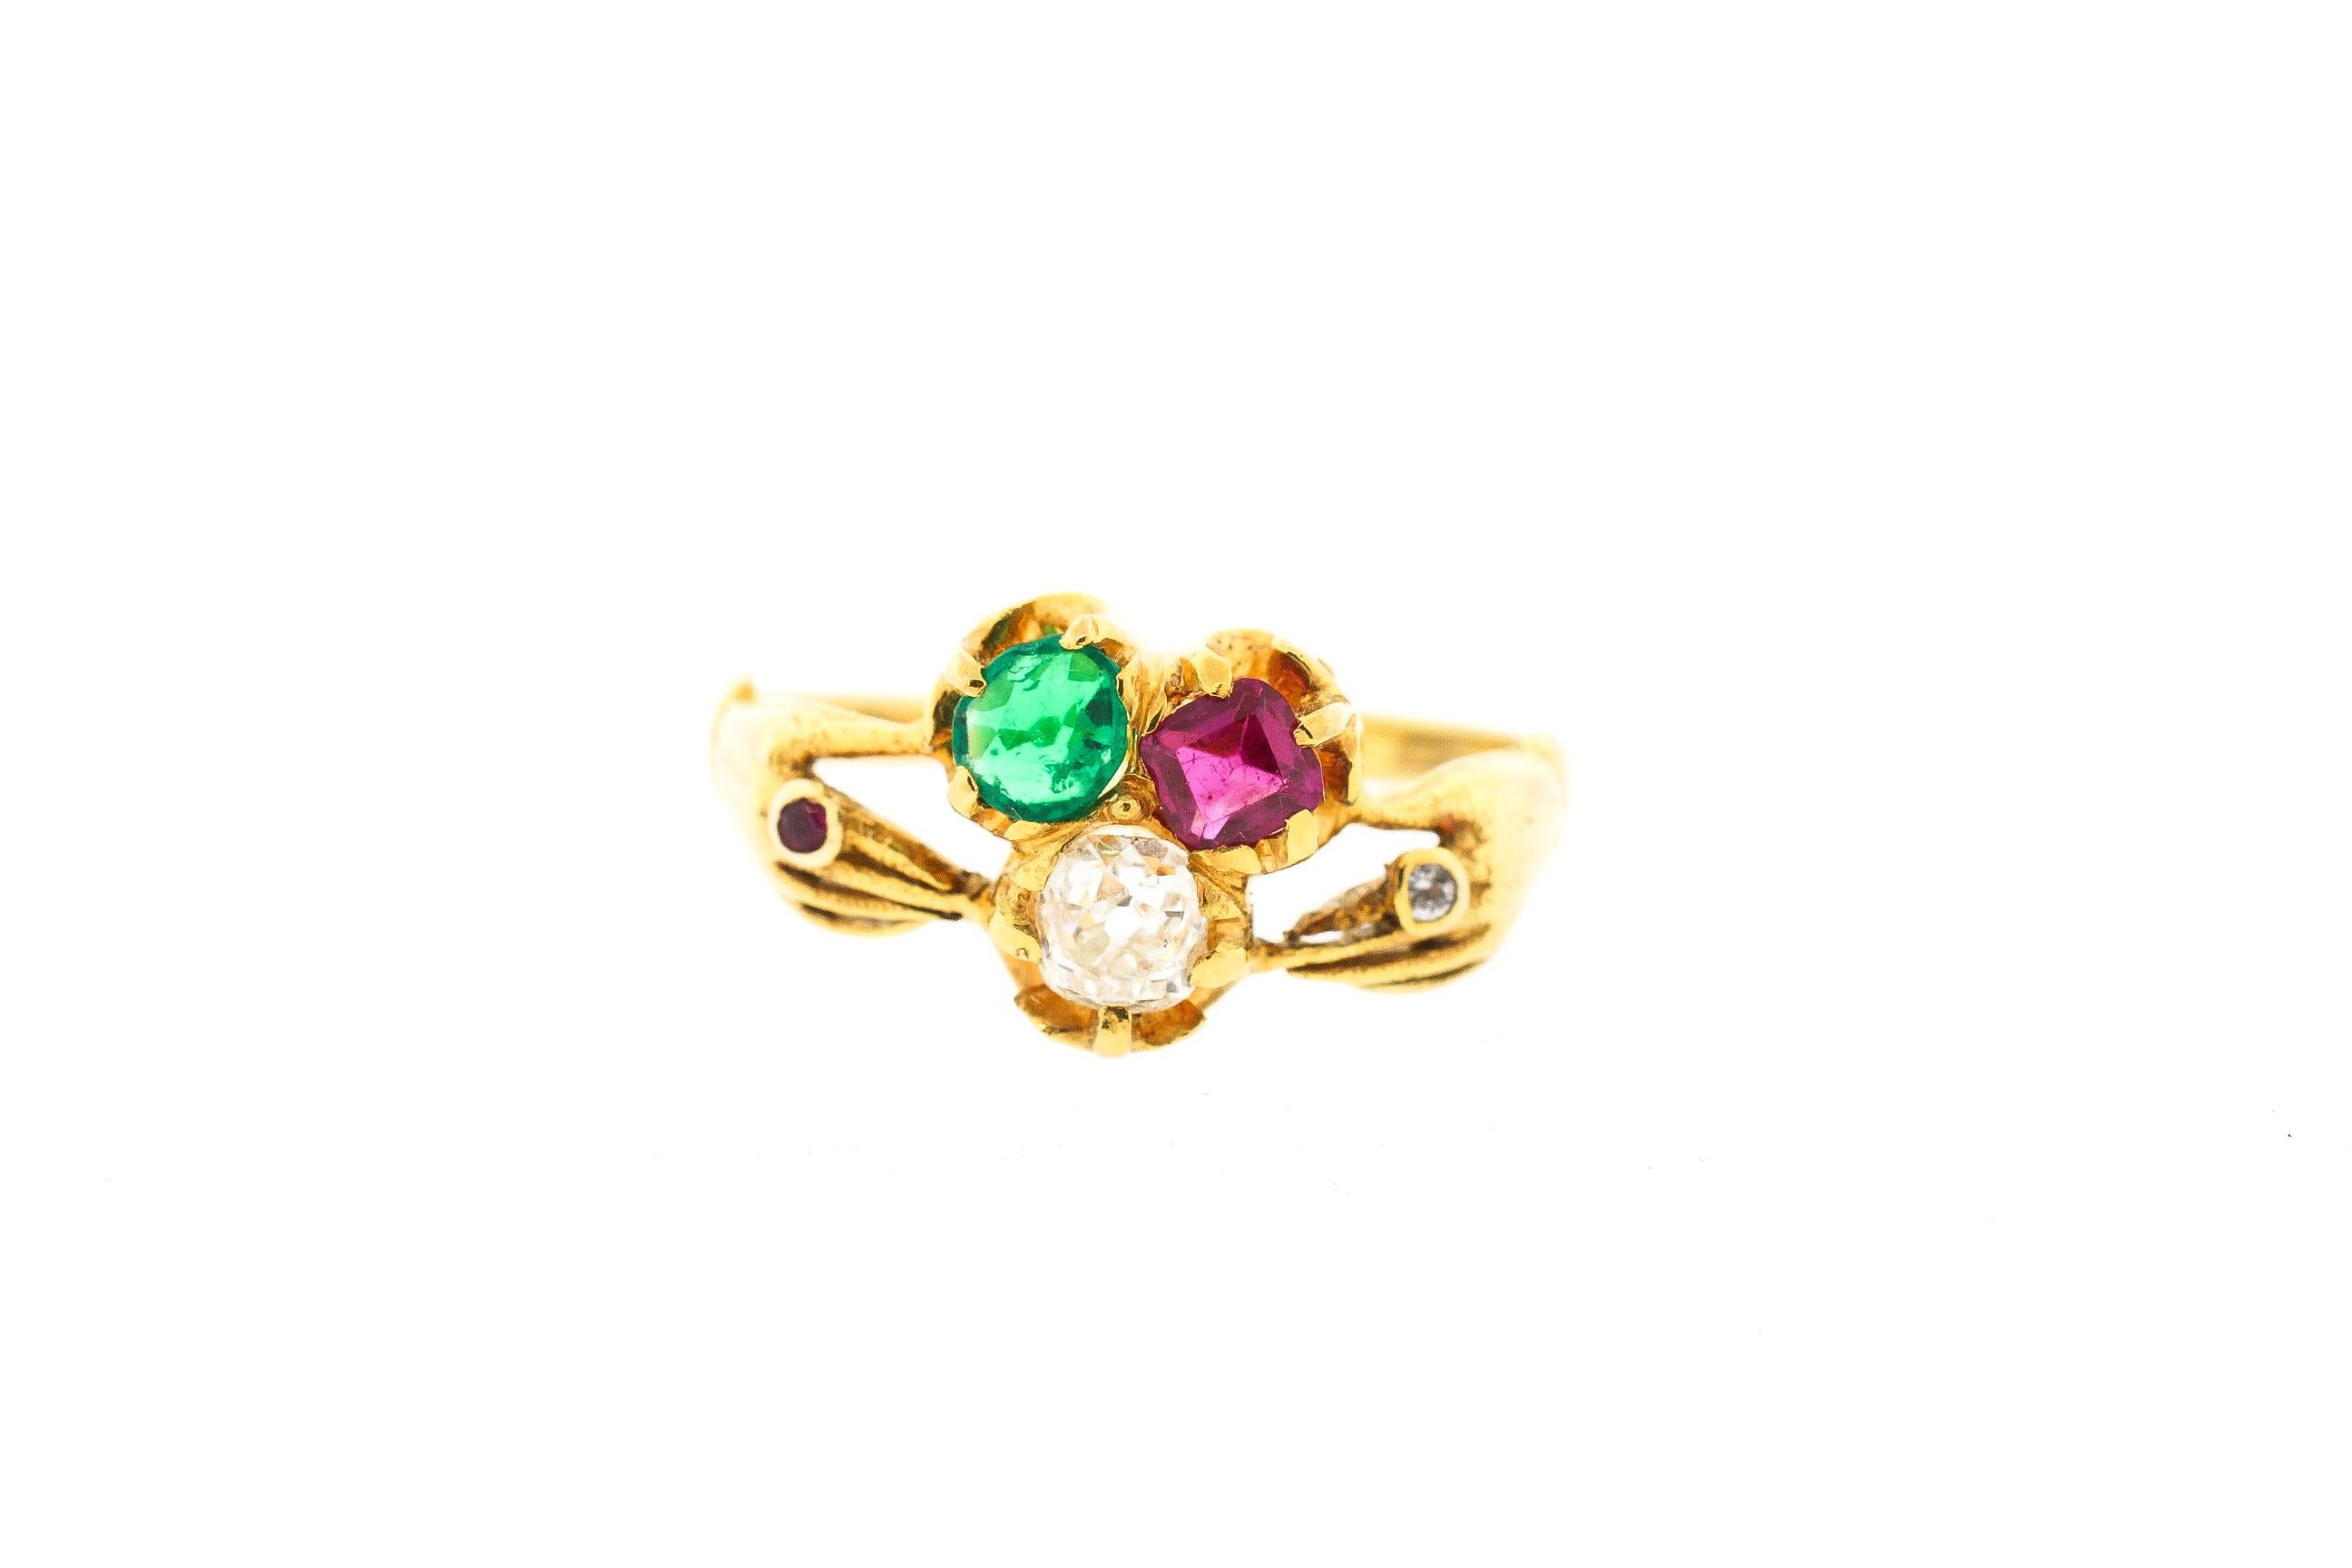 Antique Victorian 18 Karat Gold Ruby Diamond Emerald Fede Ring For Sale 1